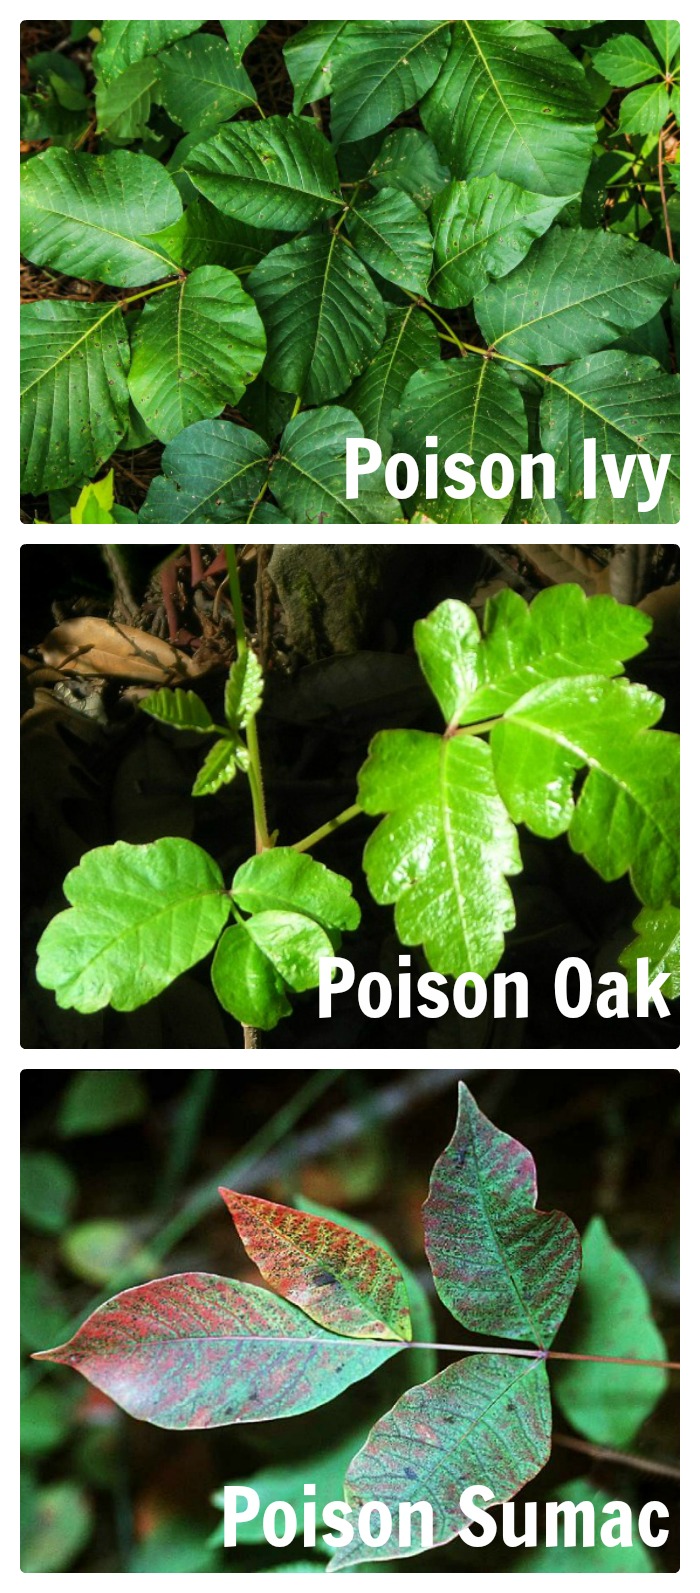 These are the three poisonous vines common to homes in our area - poison ivy, poison oak and poison sumac. There are lots of natural ways to get rid of it in your yard without using poisonous chemicals. thegardeningcook.com